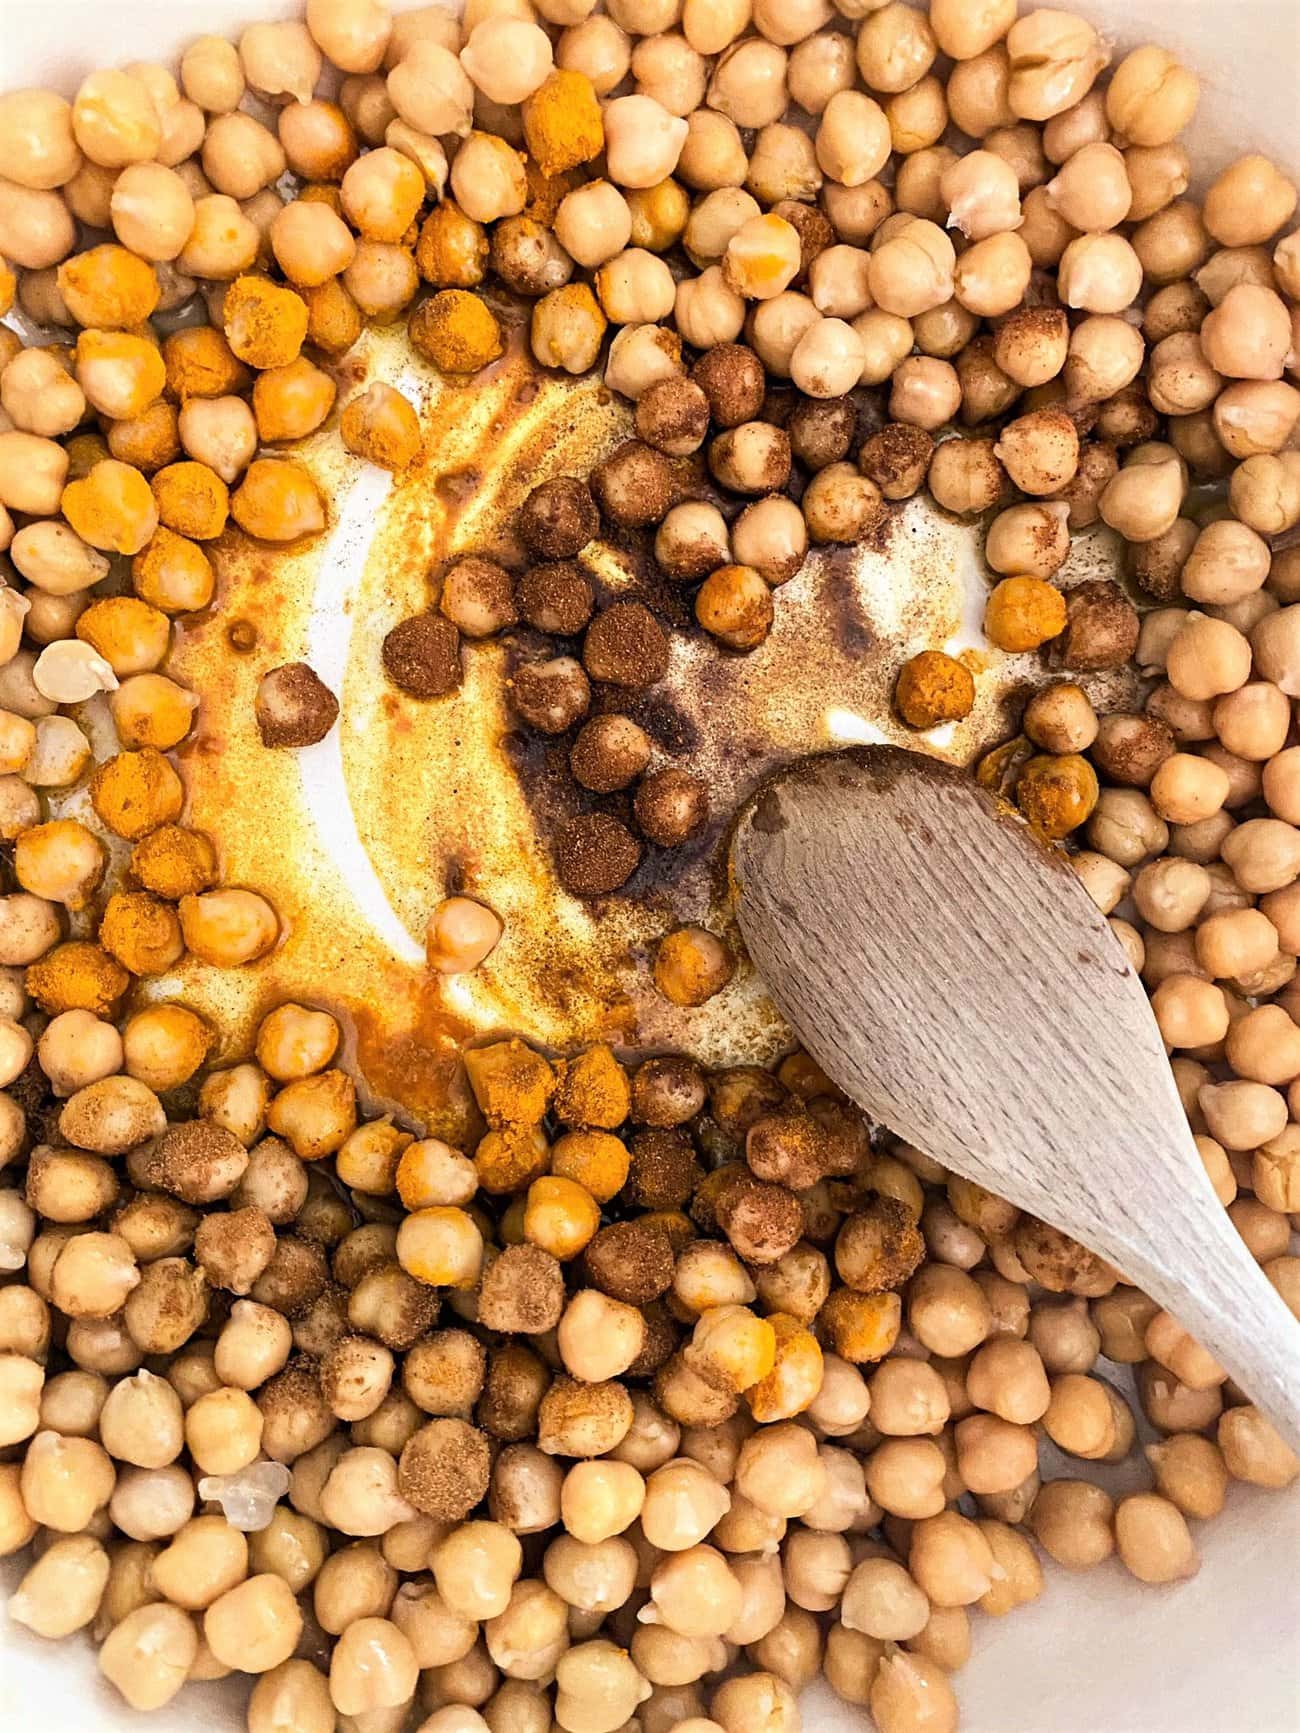 Cast iron skillet with drained chickpeas covered in blend of oil and spices with a wooden spoon